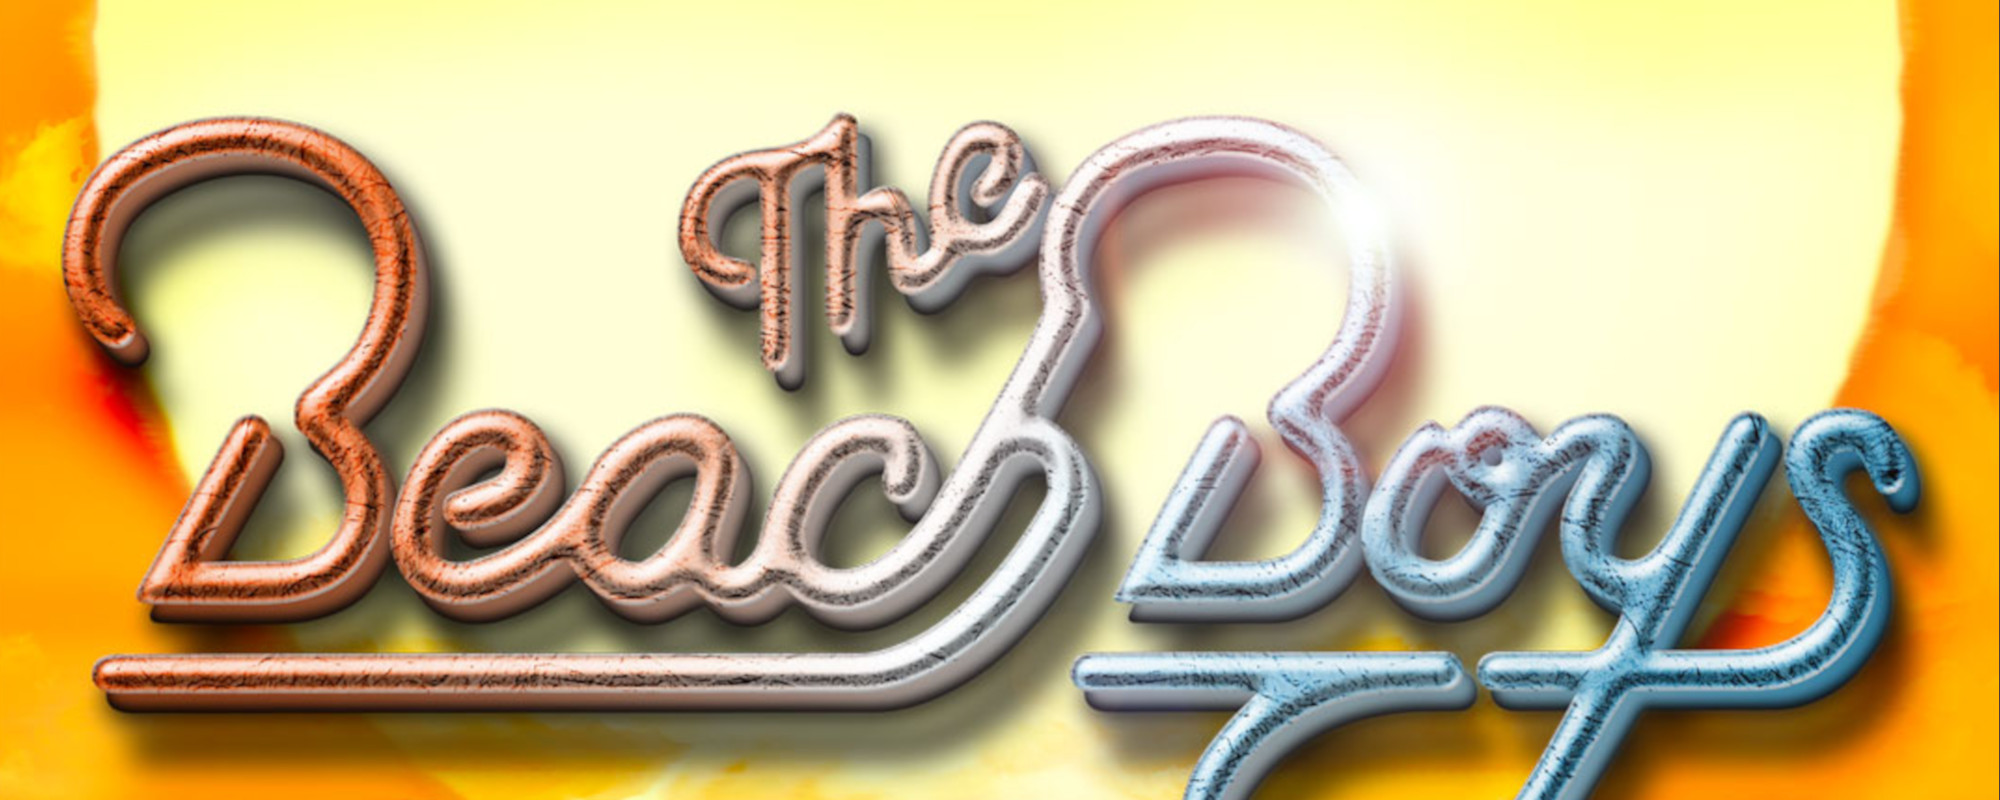 The Beach Boys Announce New Tour with the Temptations